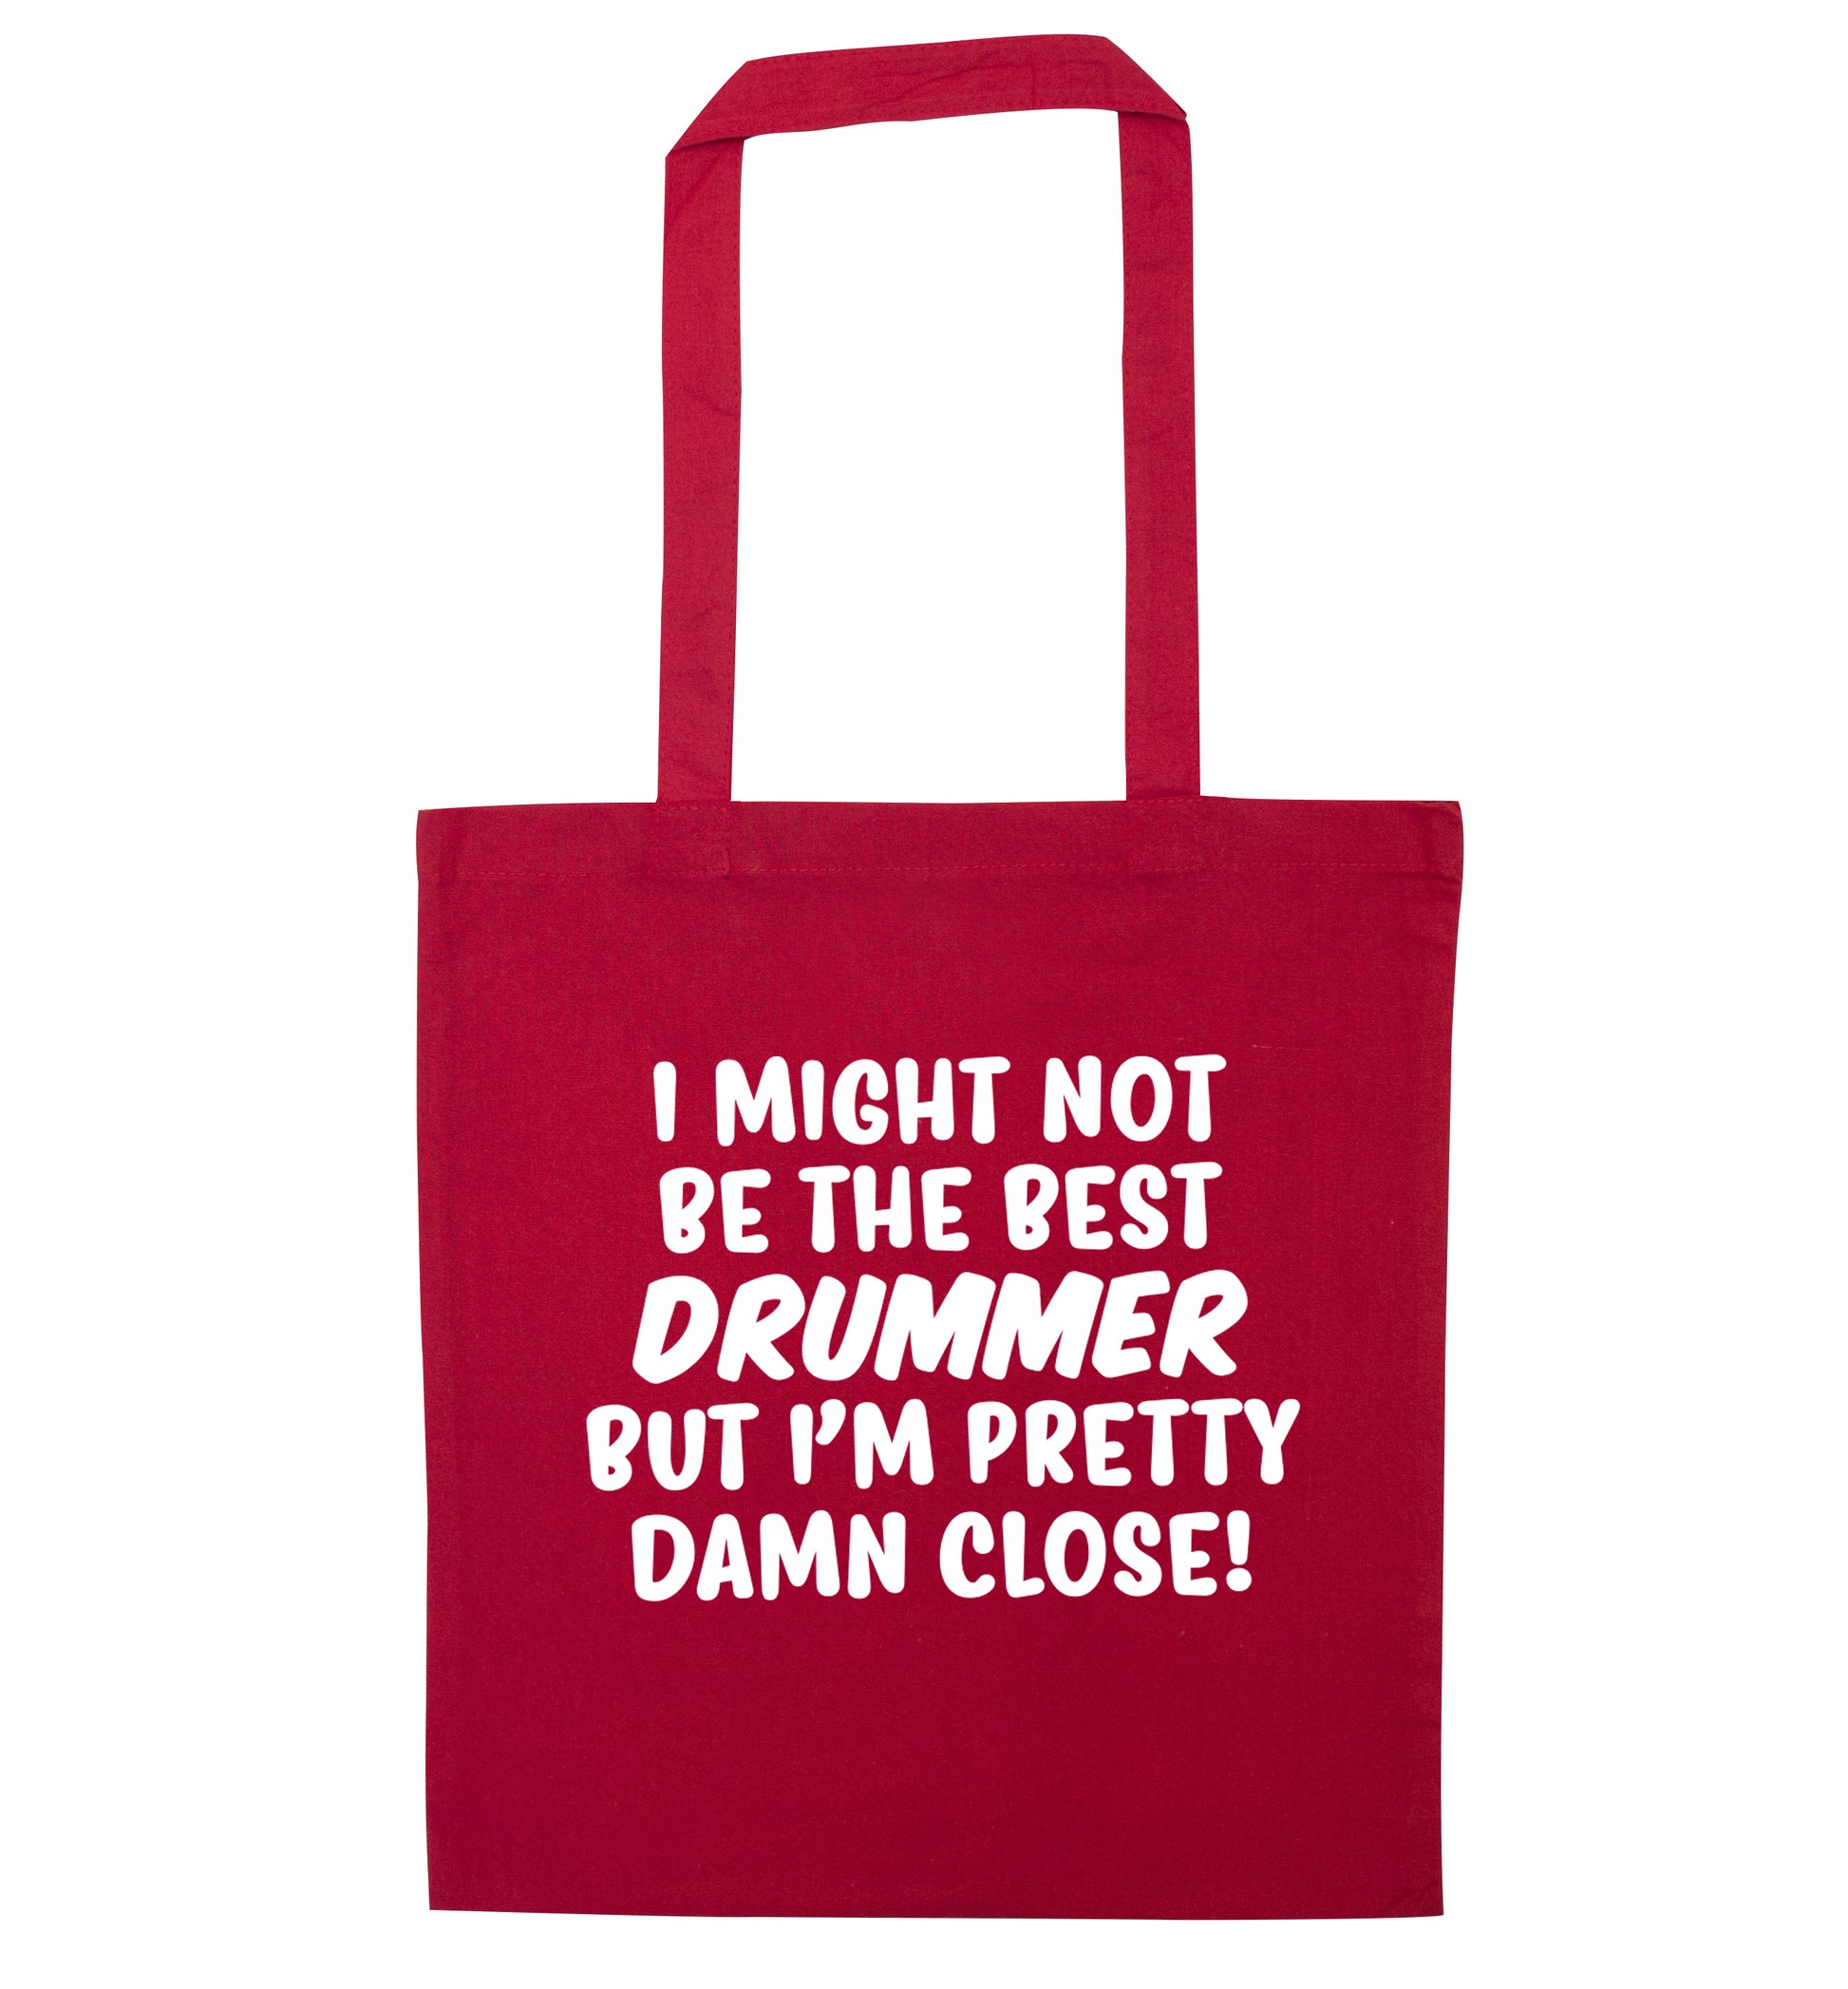 I might not be the best drummer but I'm pretty close! red tote bag